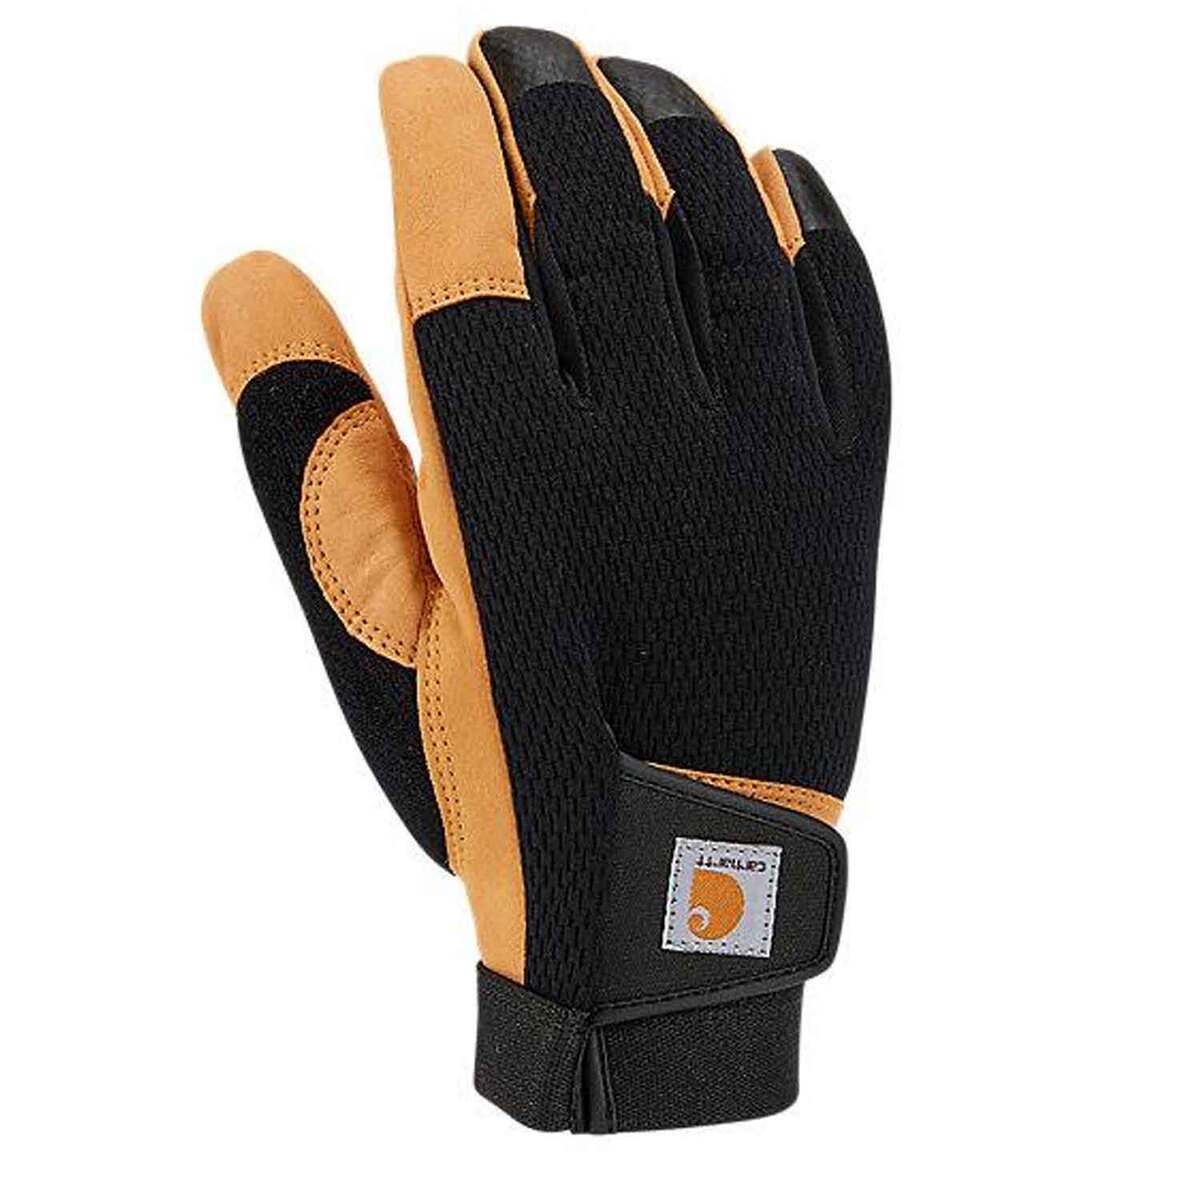 Carhartt Men's Synthetic Leather High Dexterity Touch Sensitive Secure Cuff Glove, Black Barley, Large